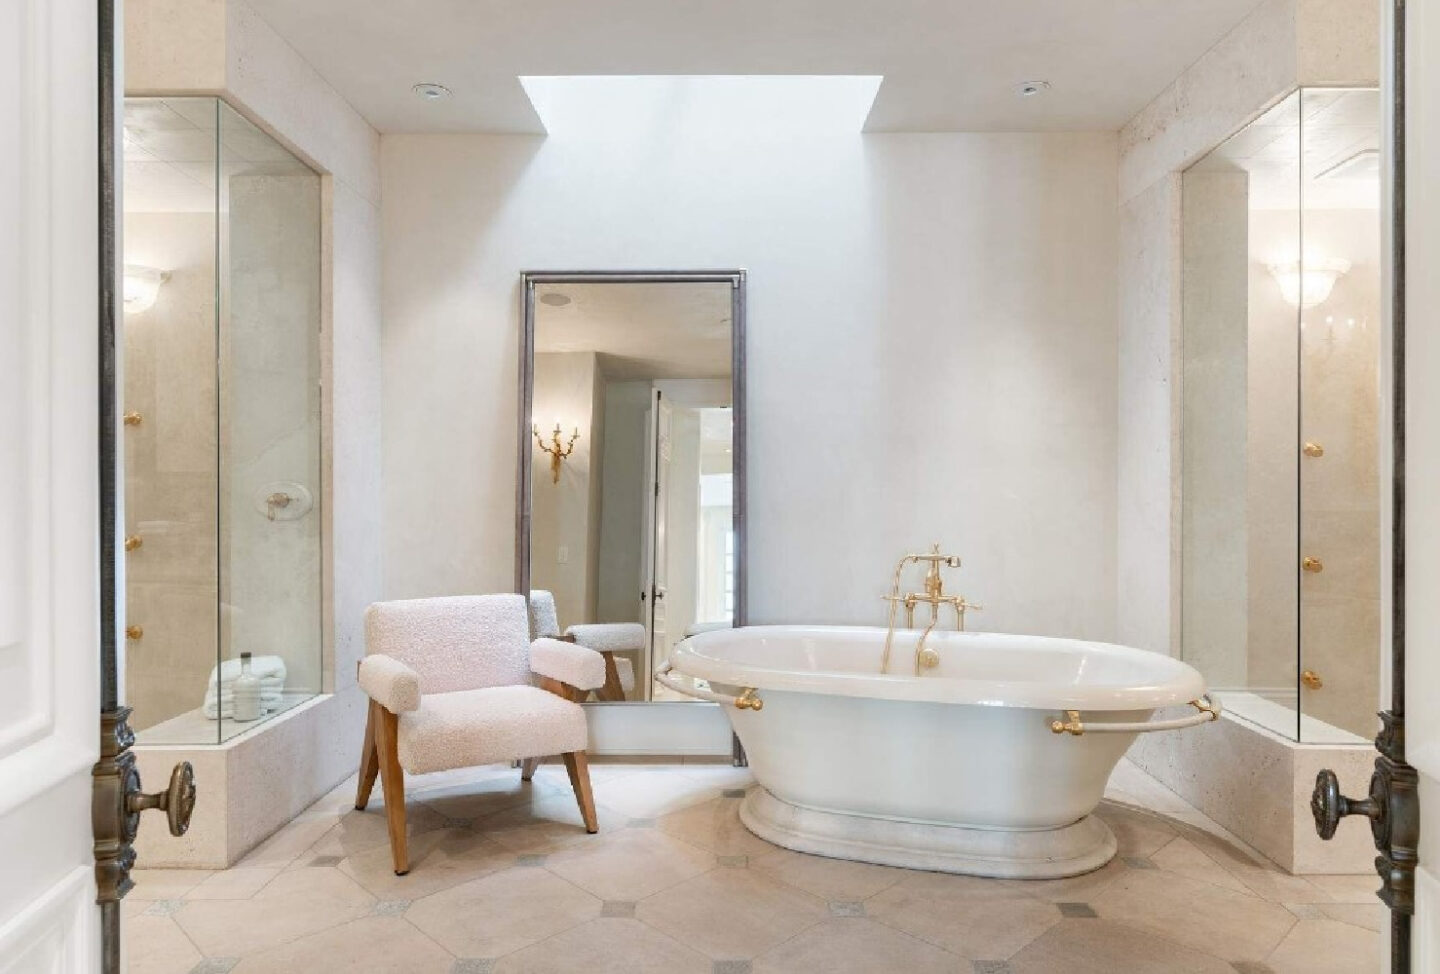 Elegant, understated, luxurious bathroom with soaking tub in a French Provincial mansion in San Francisco. #luxuriousbathroom #frenchbathroom #modernfrench